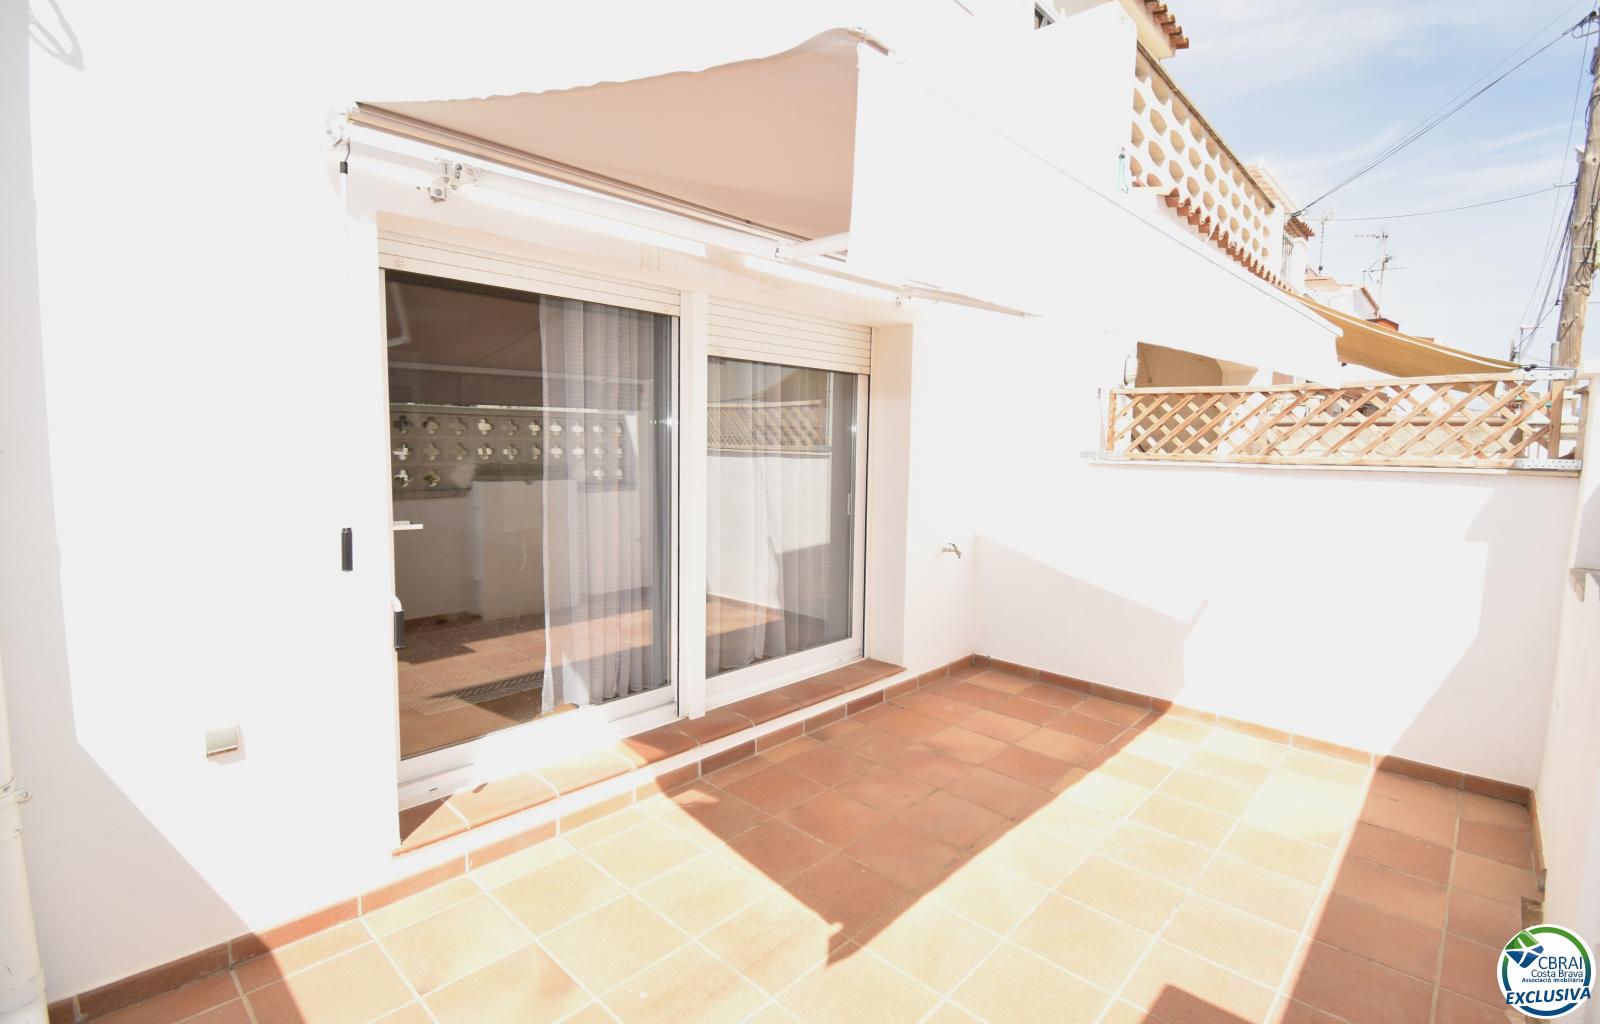 EMPURIABRAVA: New house with two bedrooms, patio, and garage for sale